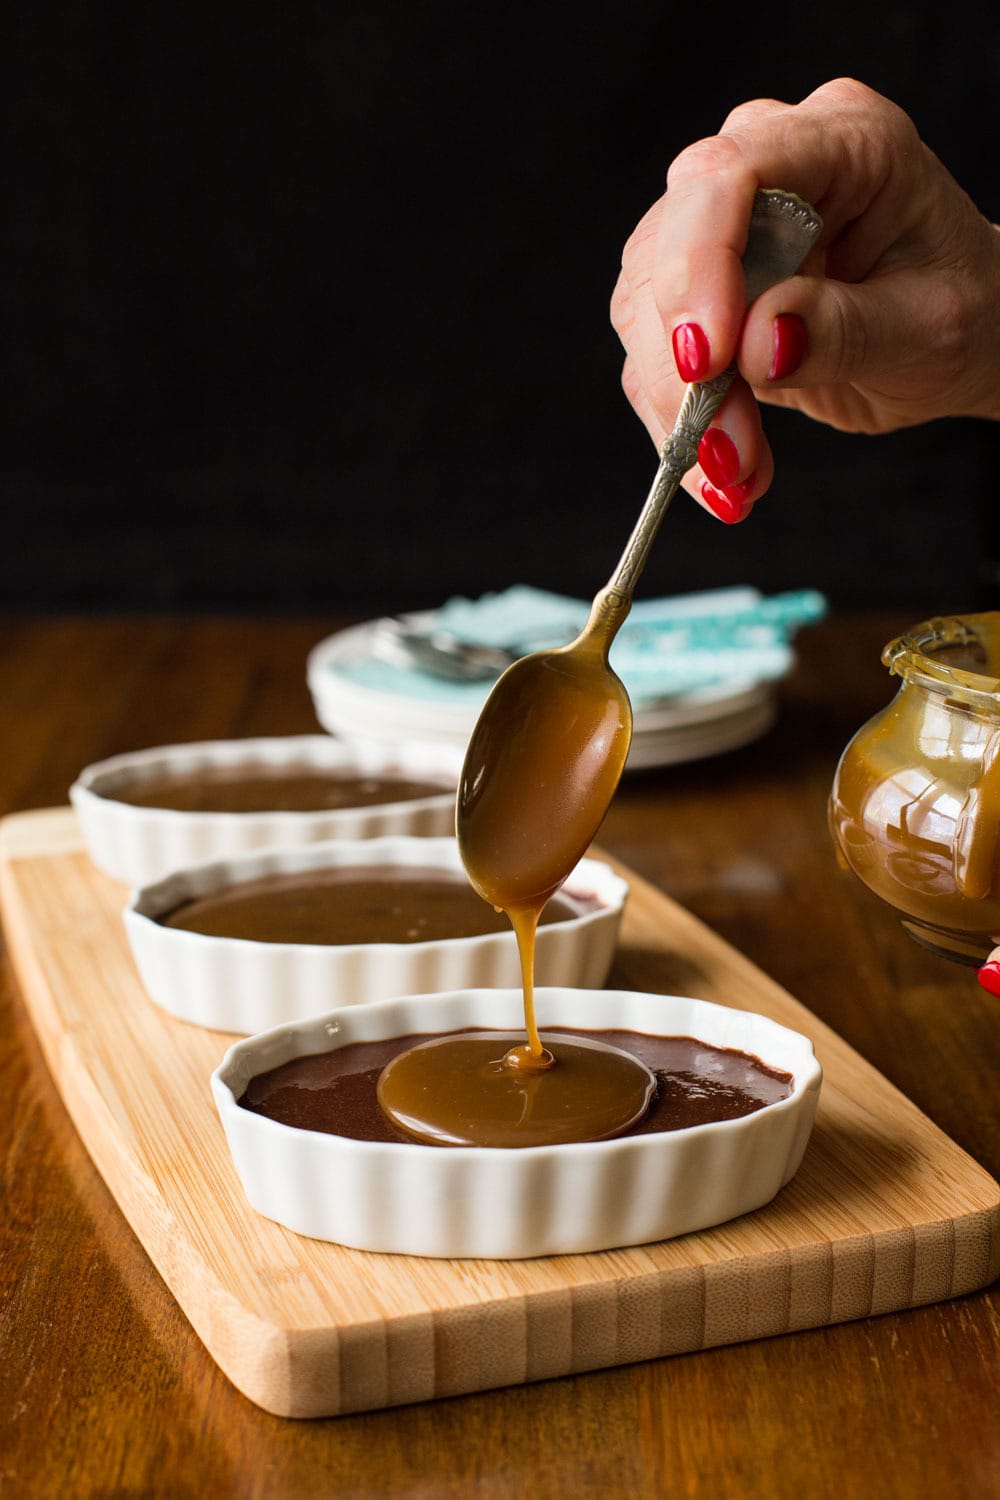 Toffee Bar Pot de Crème - silky smooth and deliciously decadent, this chocolate lover's dessert takes less than 10 minutes to throw together! thecafesucrefarine.com